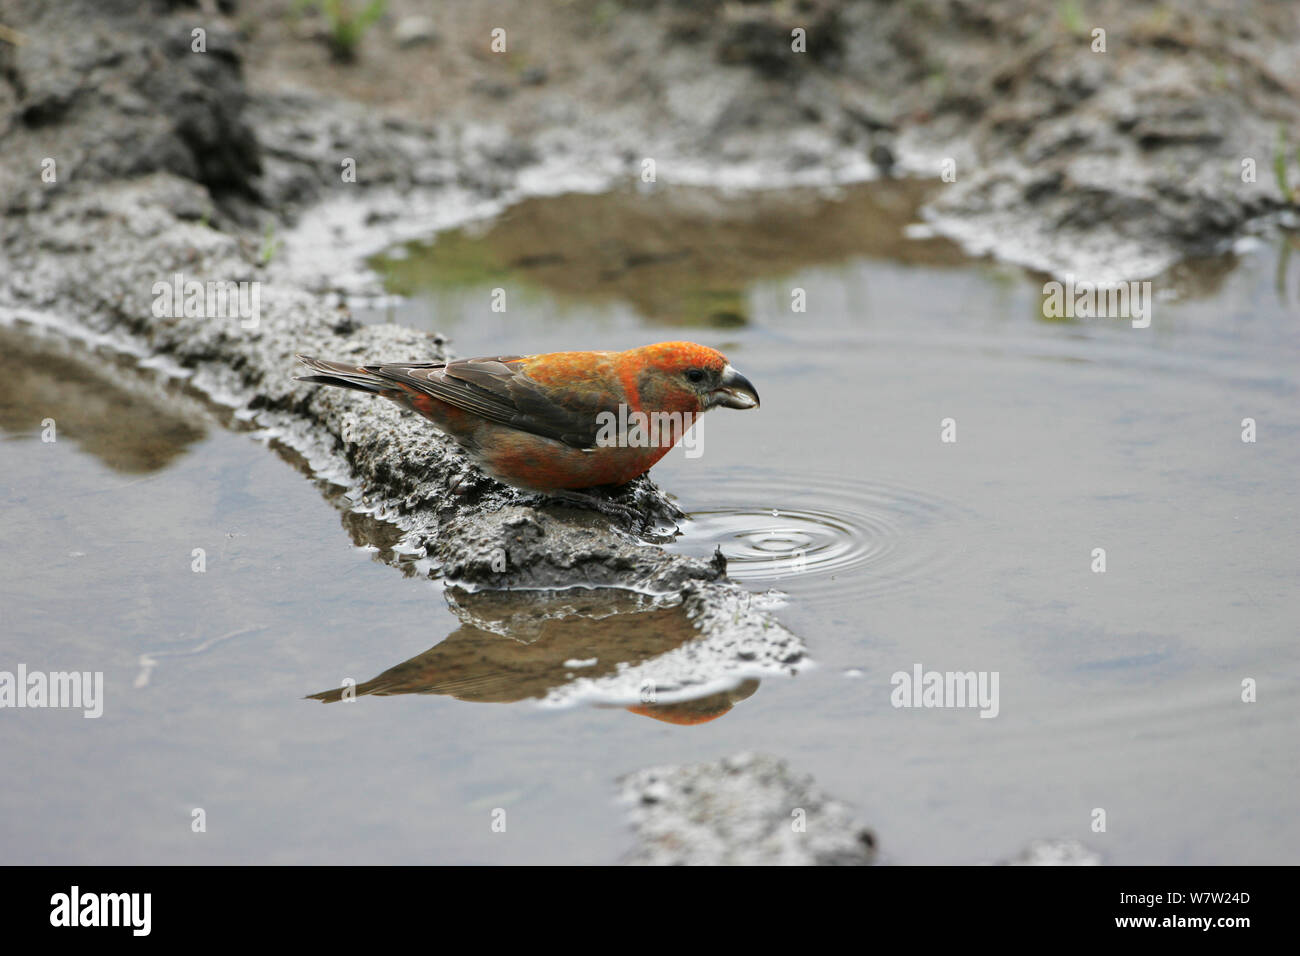 Common crossbill (Loxia curvirostra) male drinking from muddy puddle. Glen Feshie Highland Region, Scotland, UK, May. Stock Photo